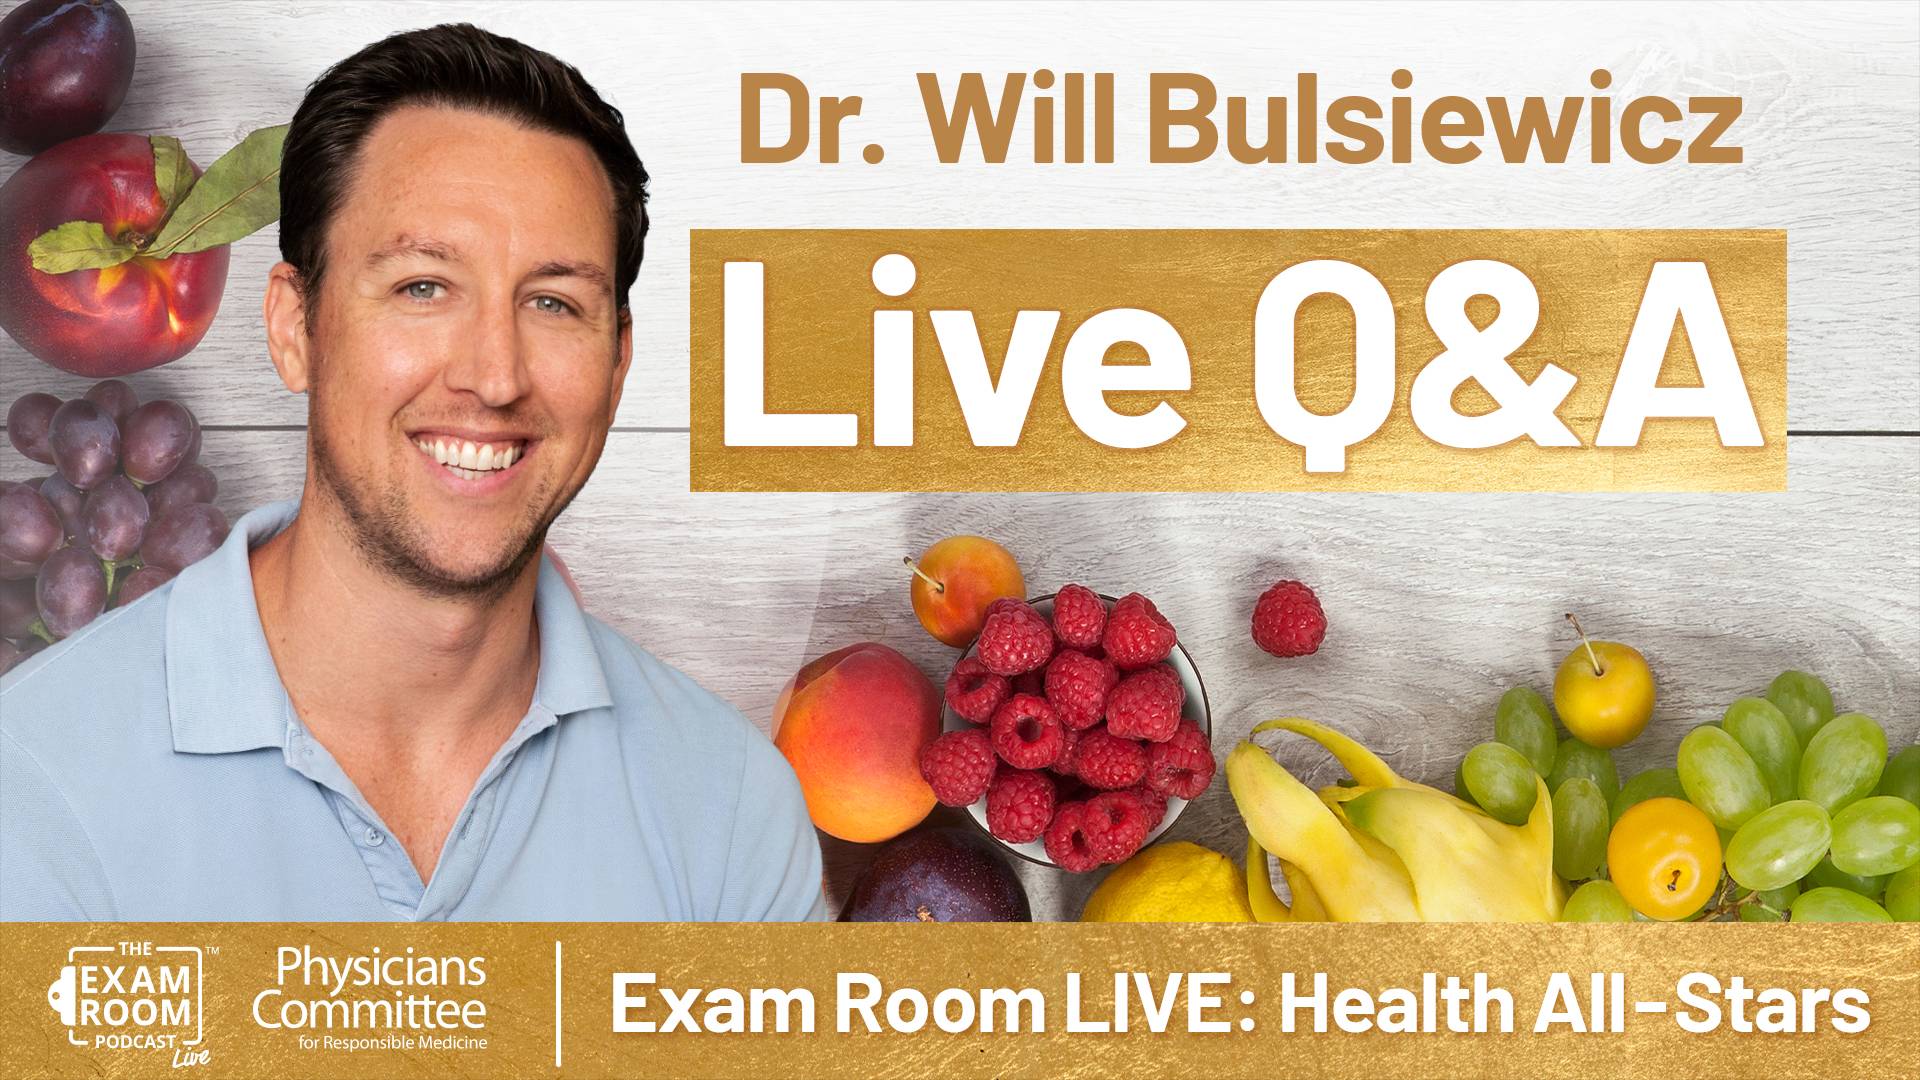 5 Power Foods You Should Start Eating with Dr. Will Bulsiewicz